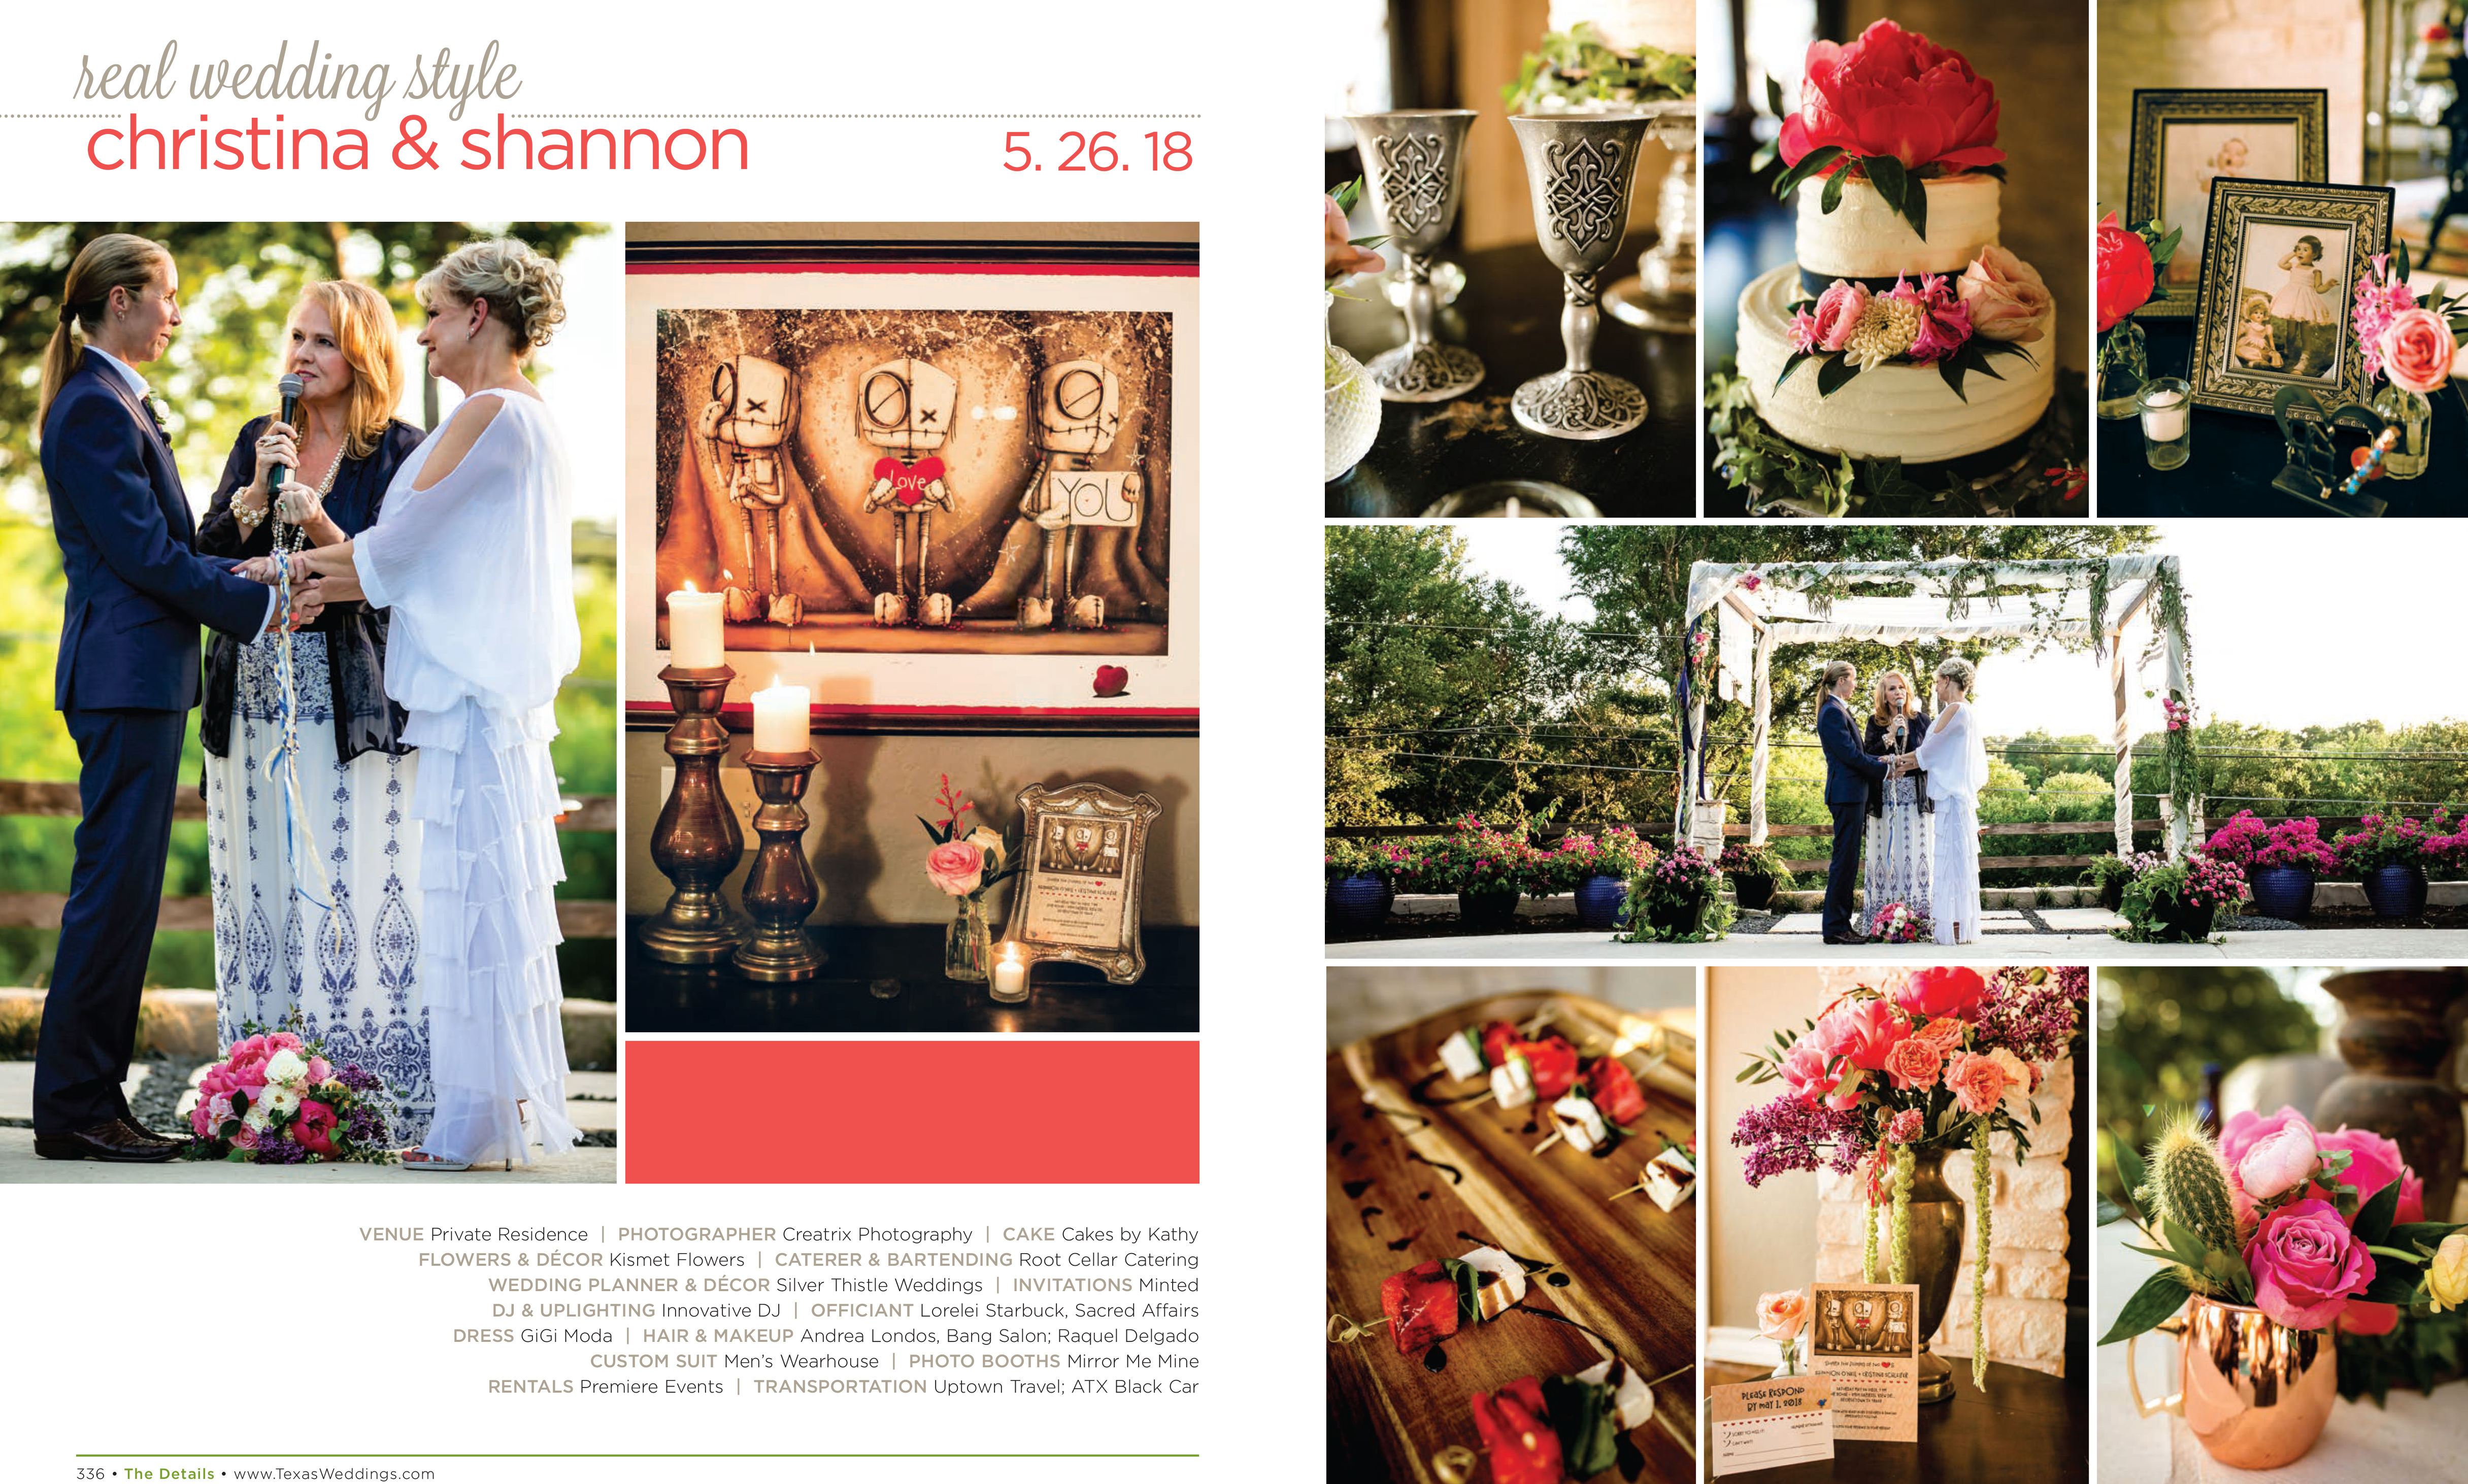 Christina & Shannon in their Real Wedding Page in the Fall/Winter 2018 Texas Wedding Guide